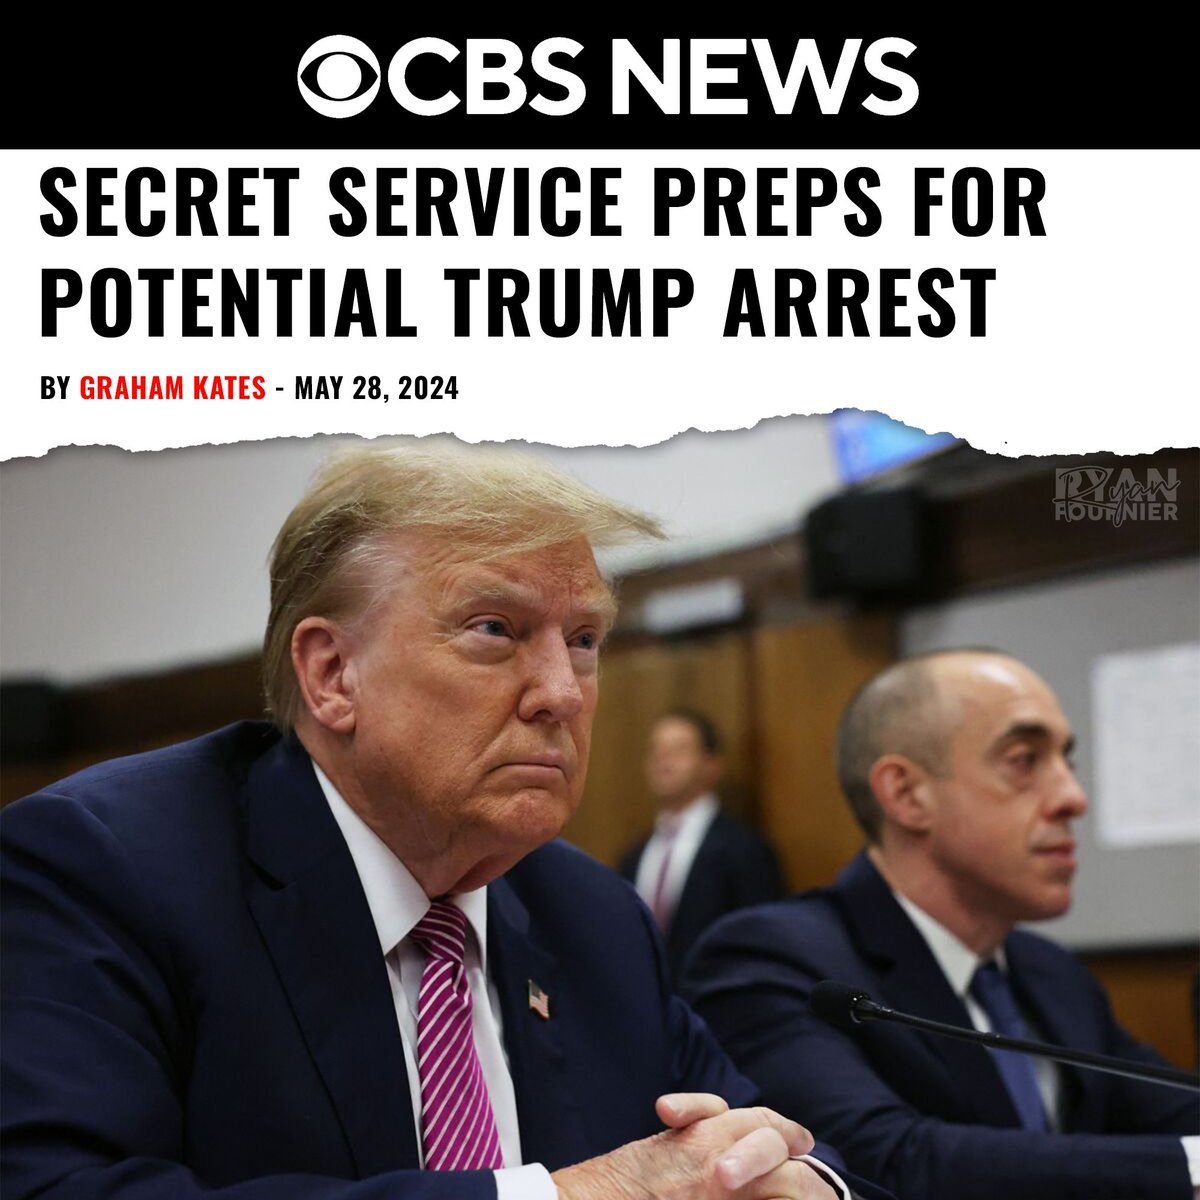 The USSS has met with local authorities for the potential outcome of President Trump being jailed. If this happens, Trump is essentially given the keys to the White House for a second term. Never in history has this ever happened, and it will reaffirm what we have all